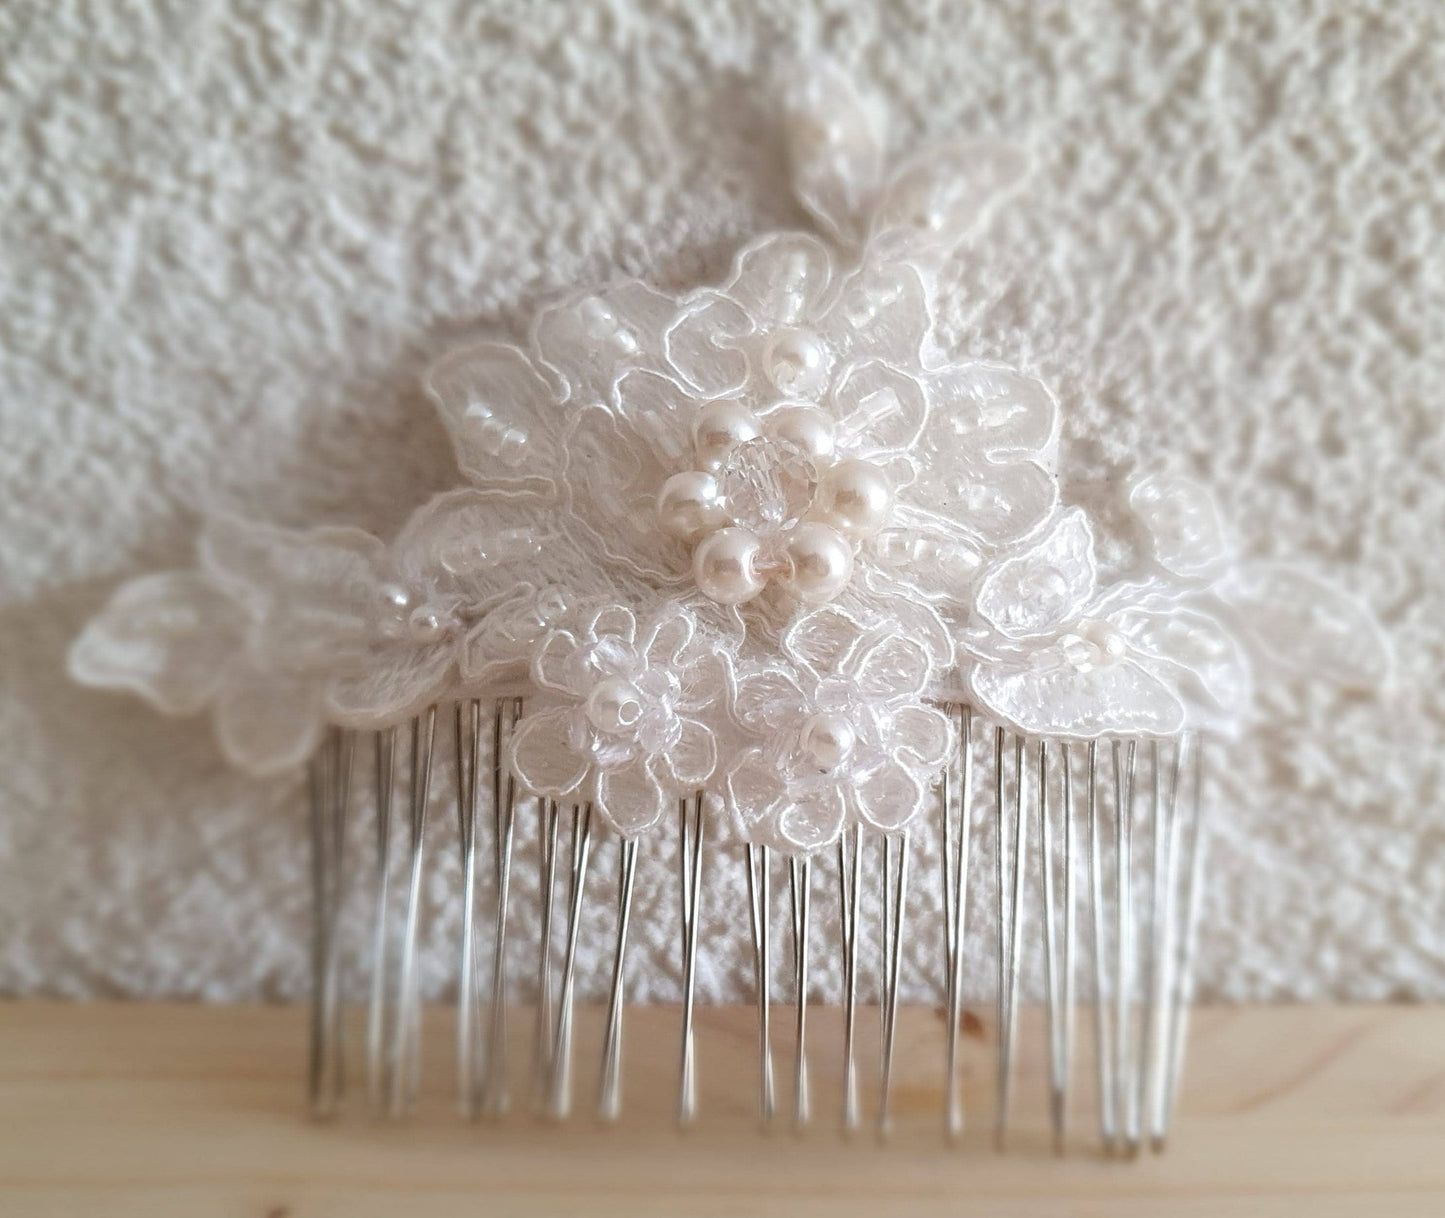 Modern handmade bridal hair comb with white beads and pearls - metal hair comb